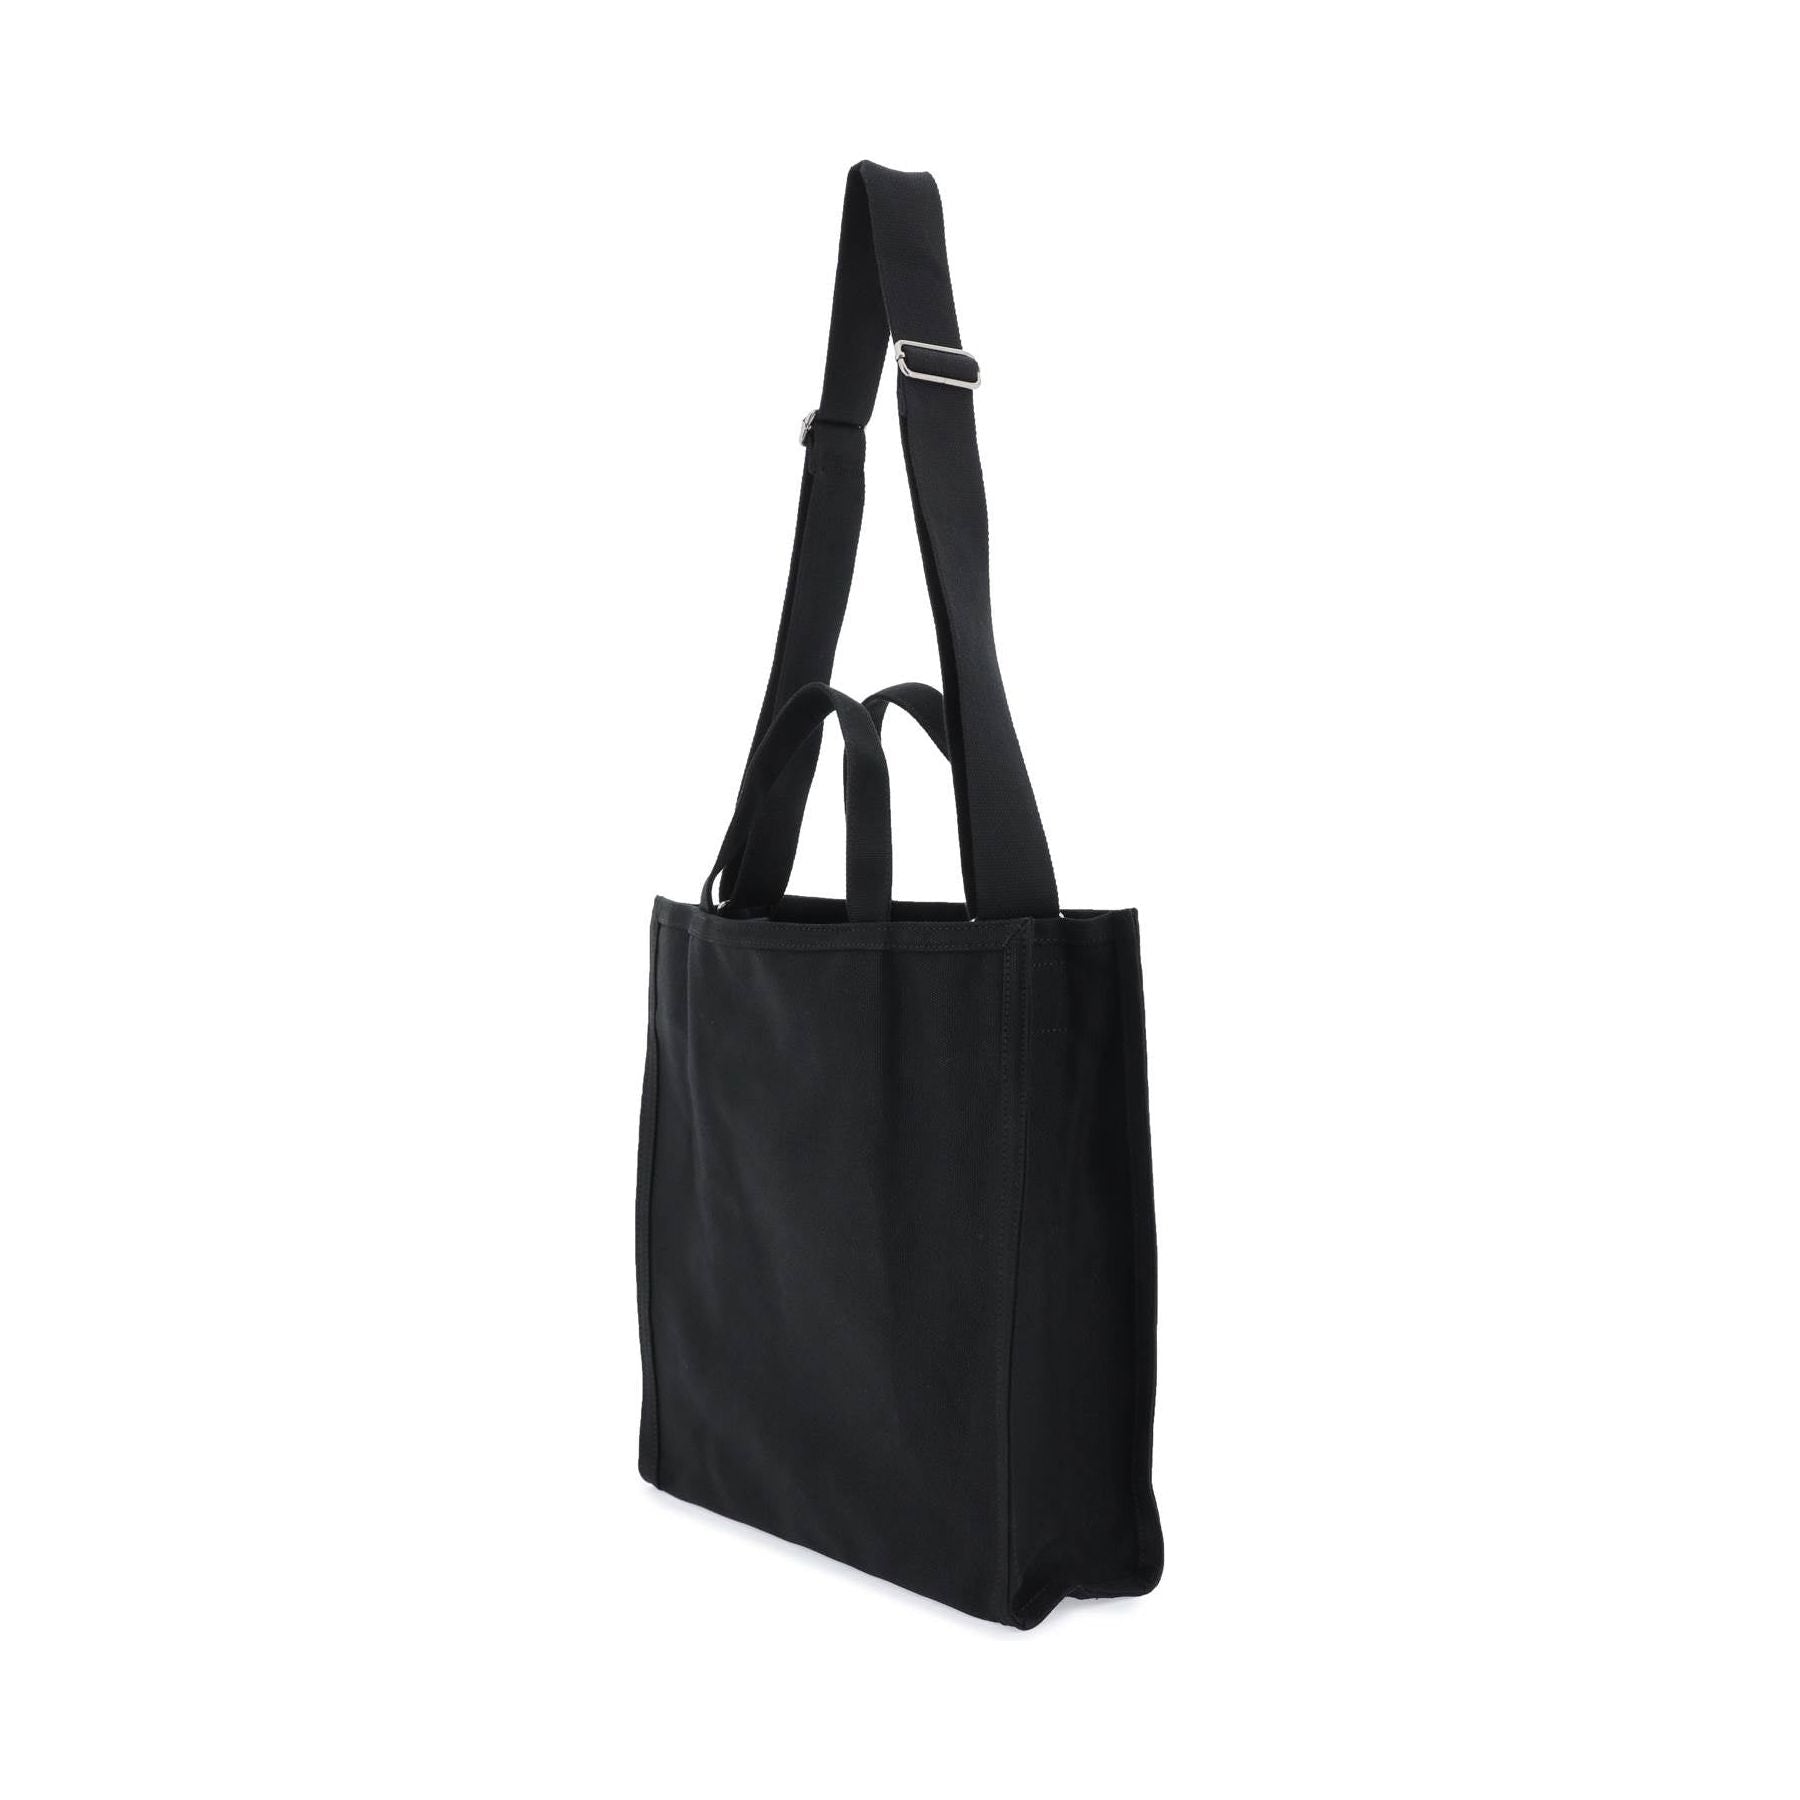 Recovery Cotton Canvas Shopping Bag